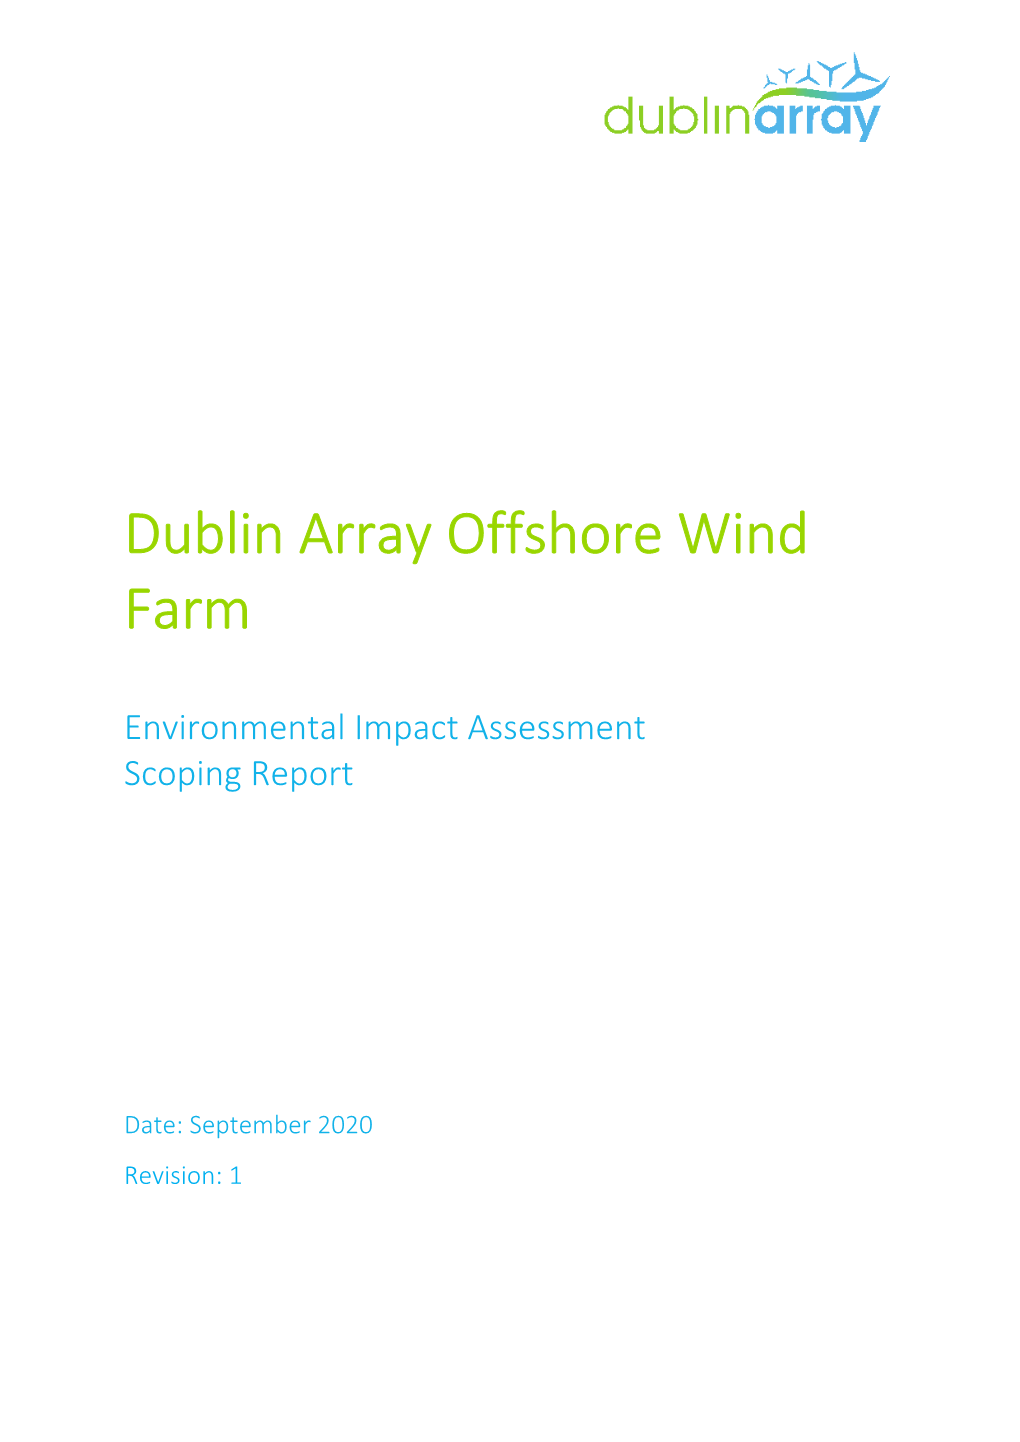 Download the Dublin Array EIAR Scoping Report